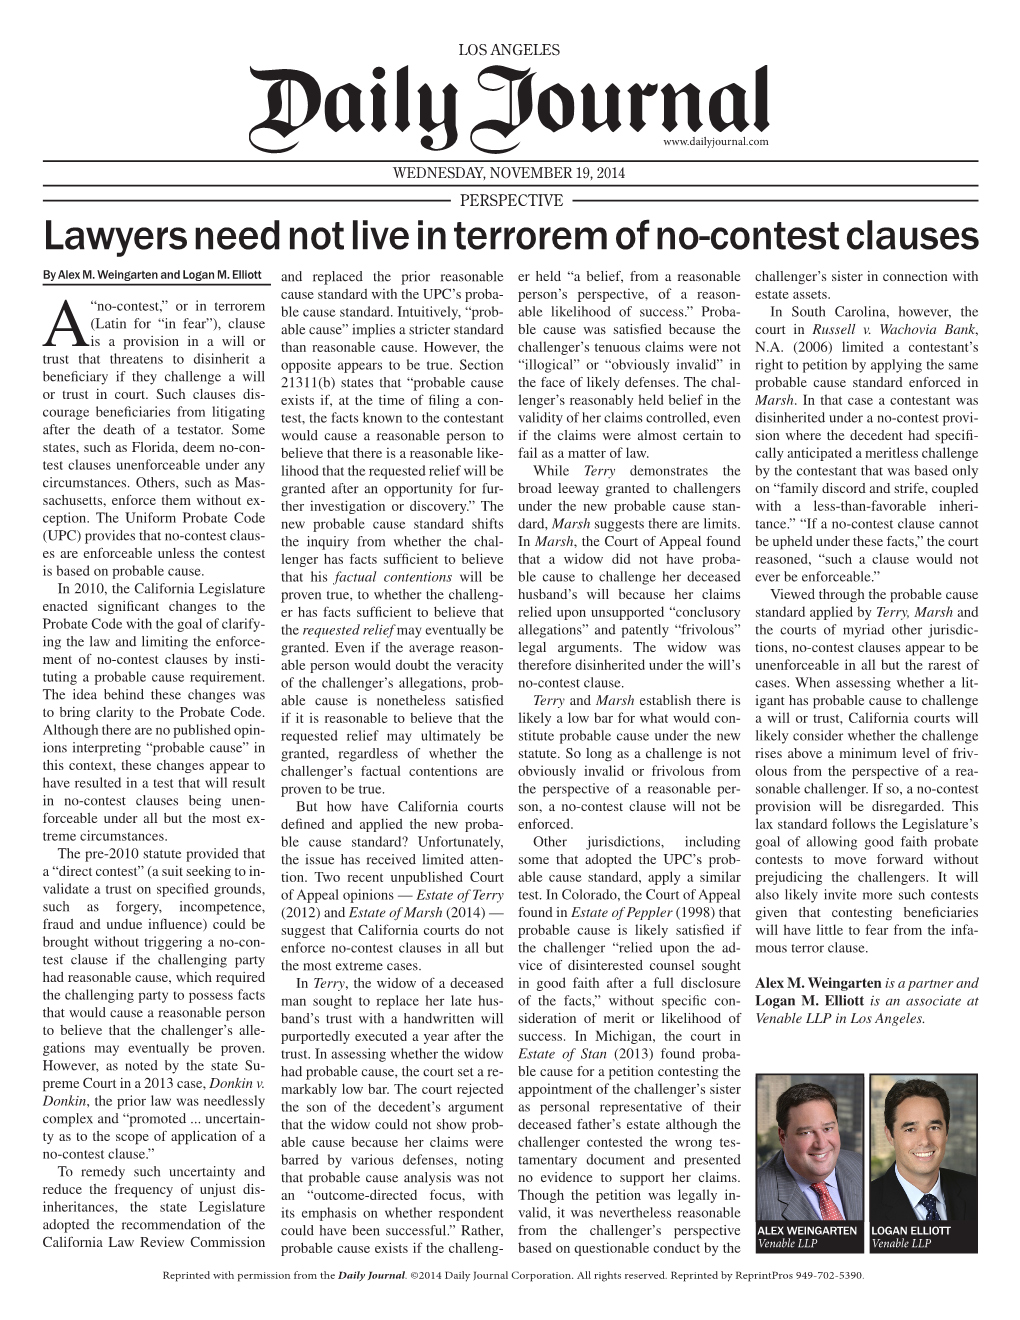 Lawyers Need Not Live in Terrorem of No-Contest Clauses by Alex M